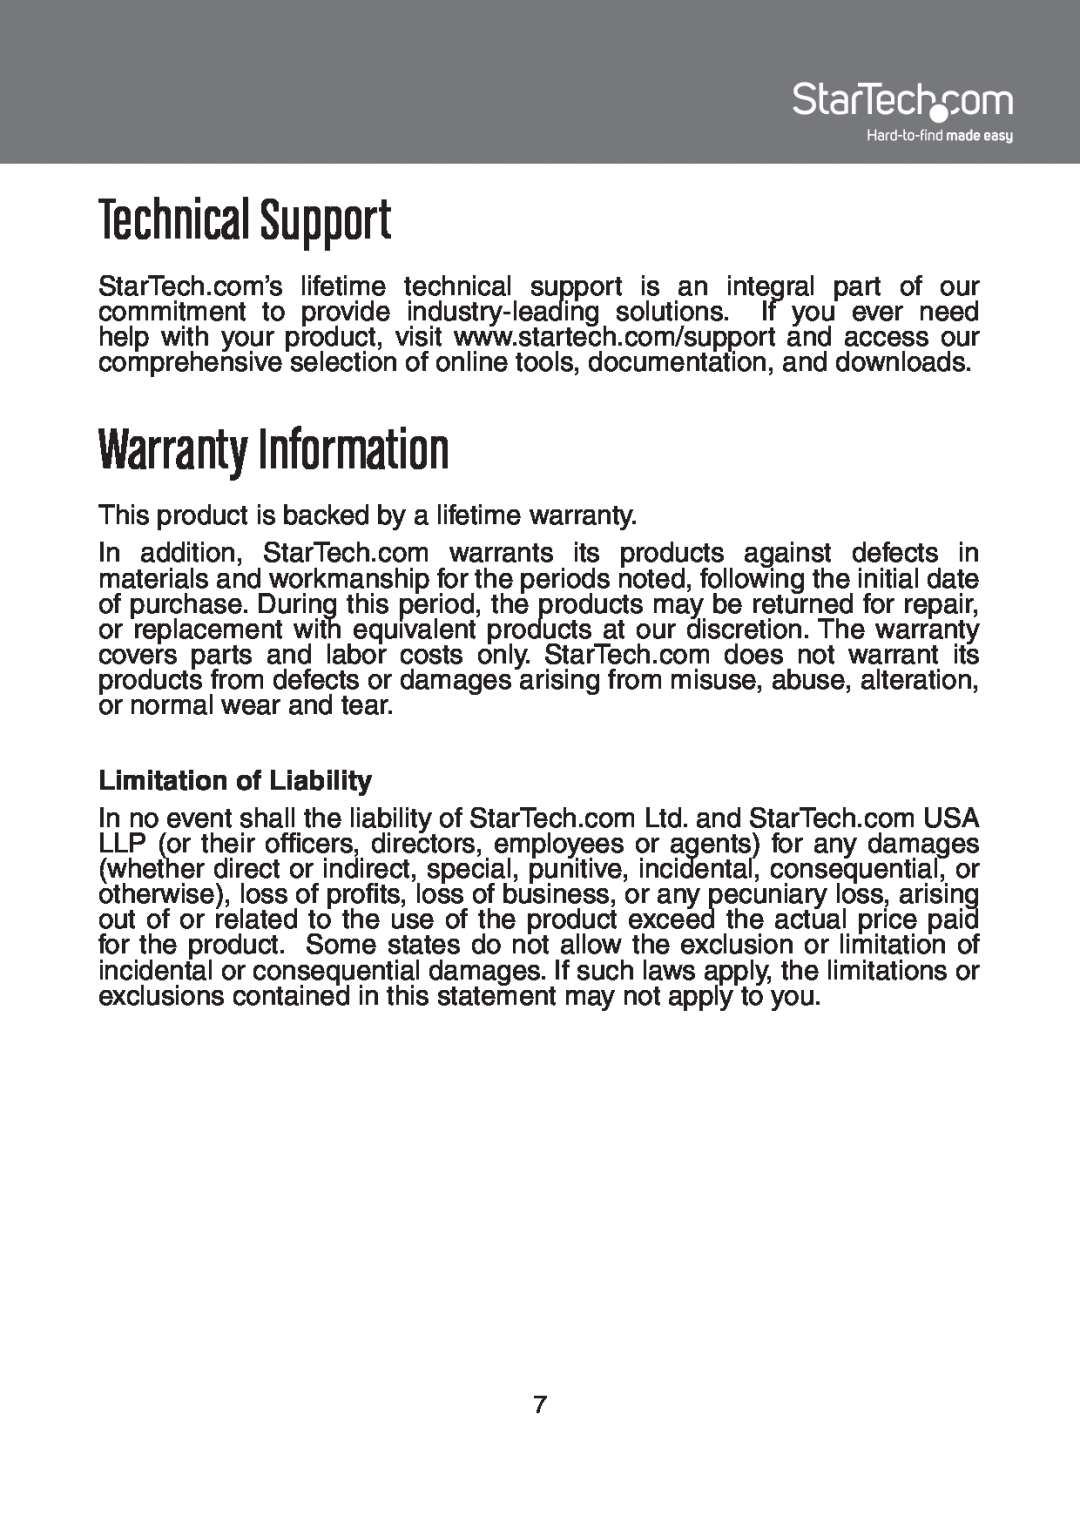 StarTech.com RS-485/422 instruction manual Technical Support, Warranty Information, Limitation of Liability 